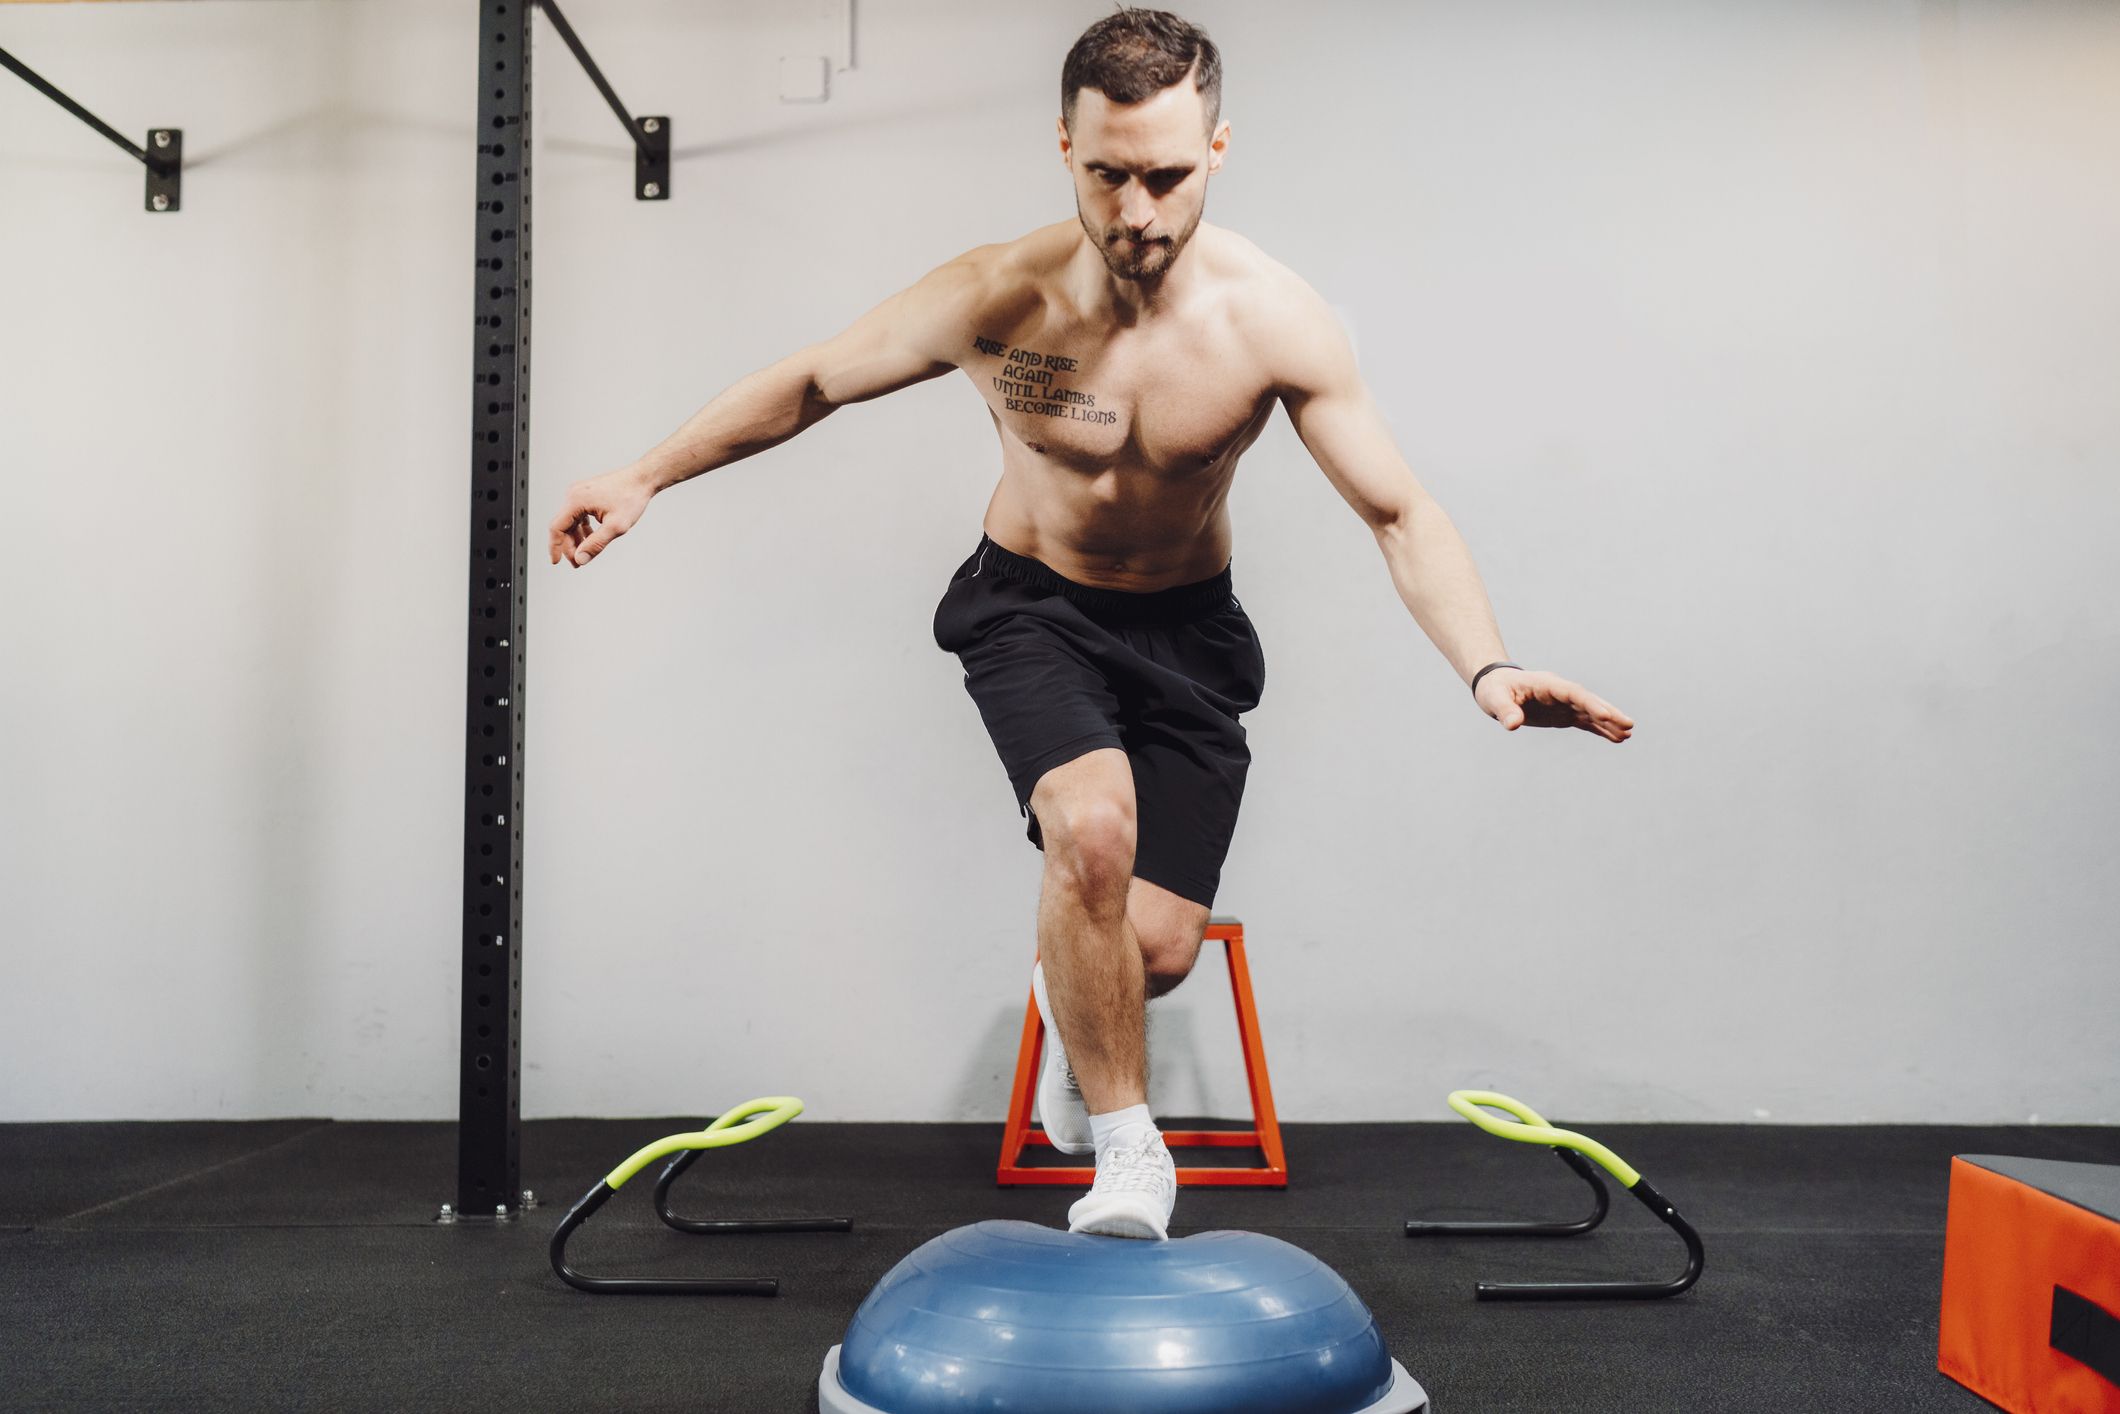 6 Exercises to Improve Balance and Why Balance Training Is Important